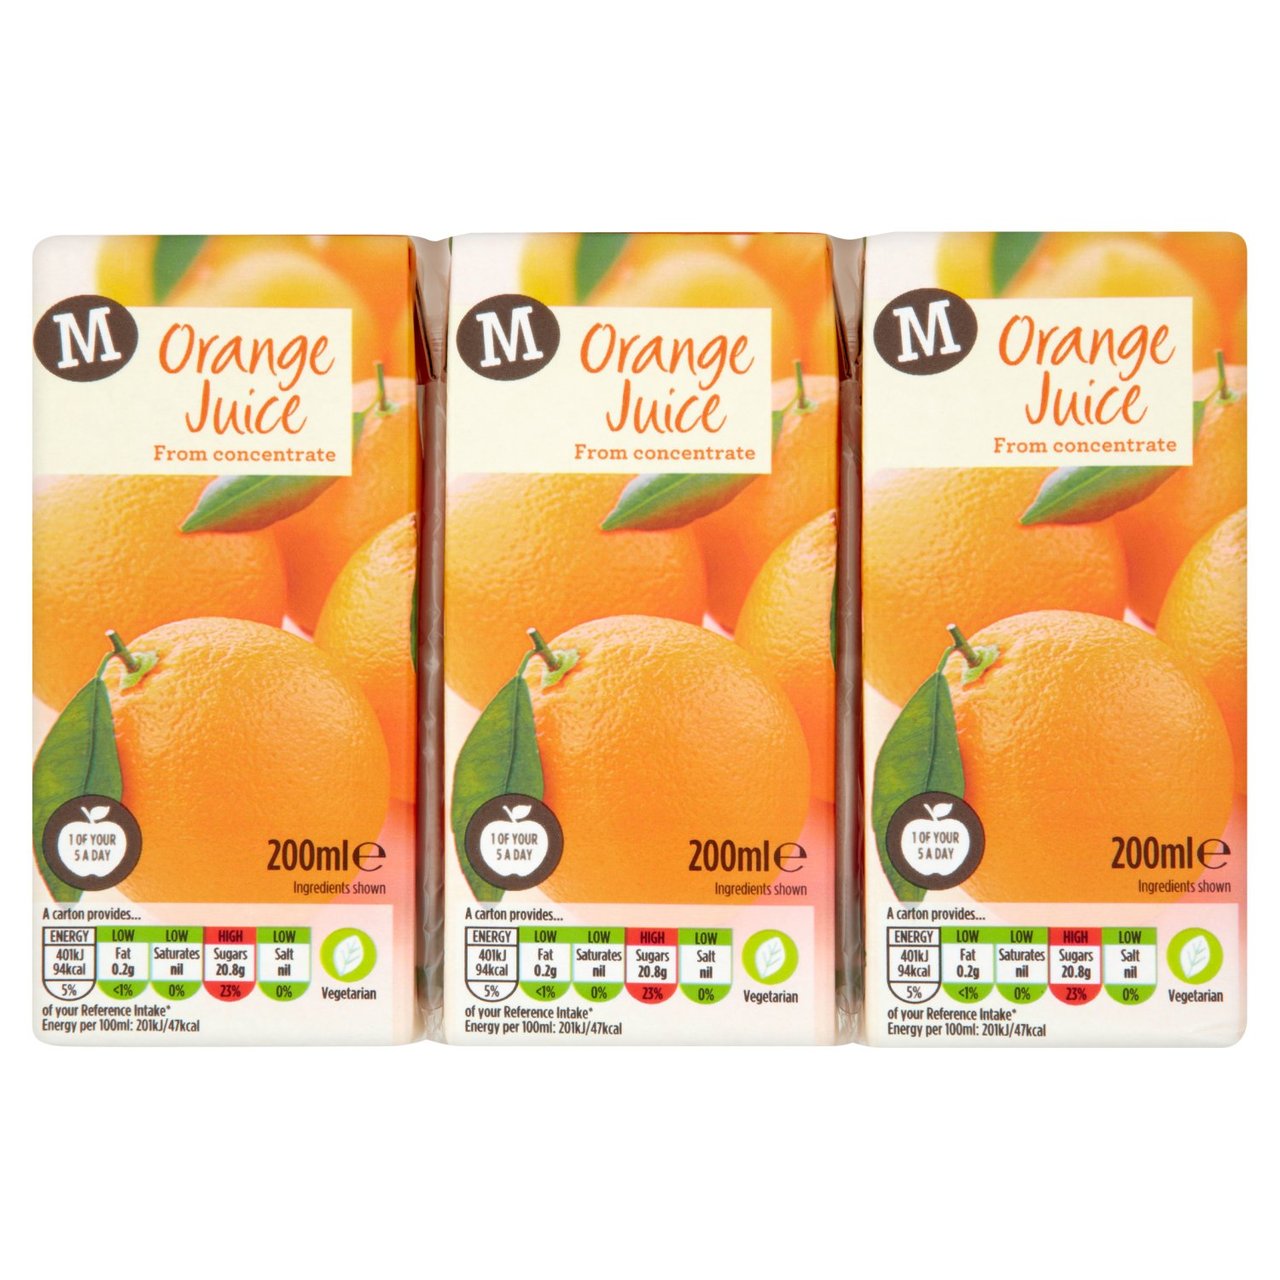 Morrisons Orange Juice From Concentrate 3 x 200ml